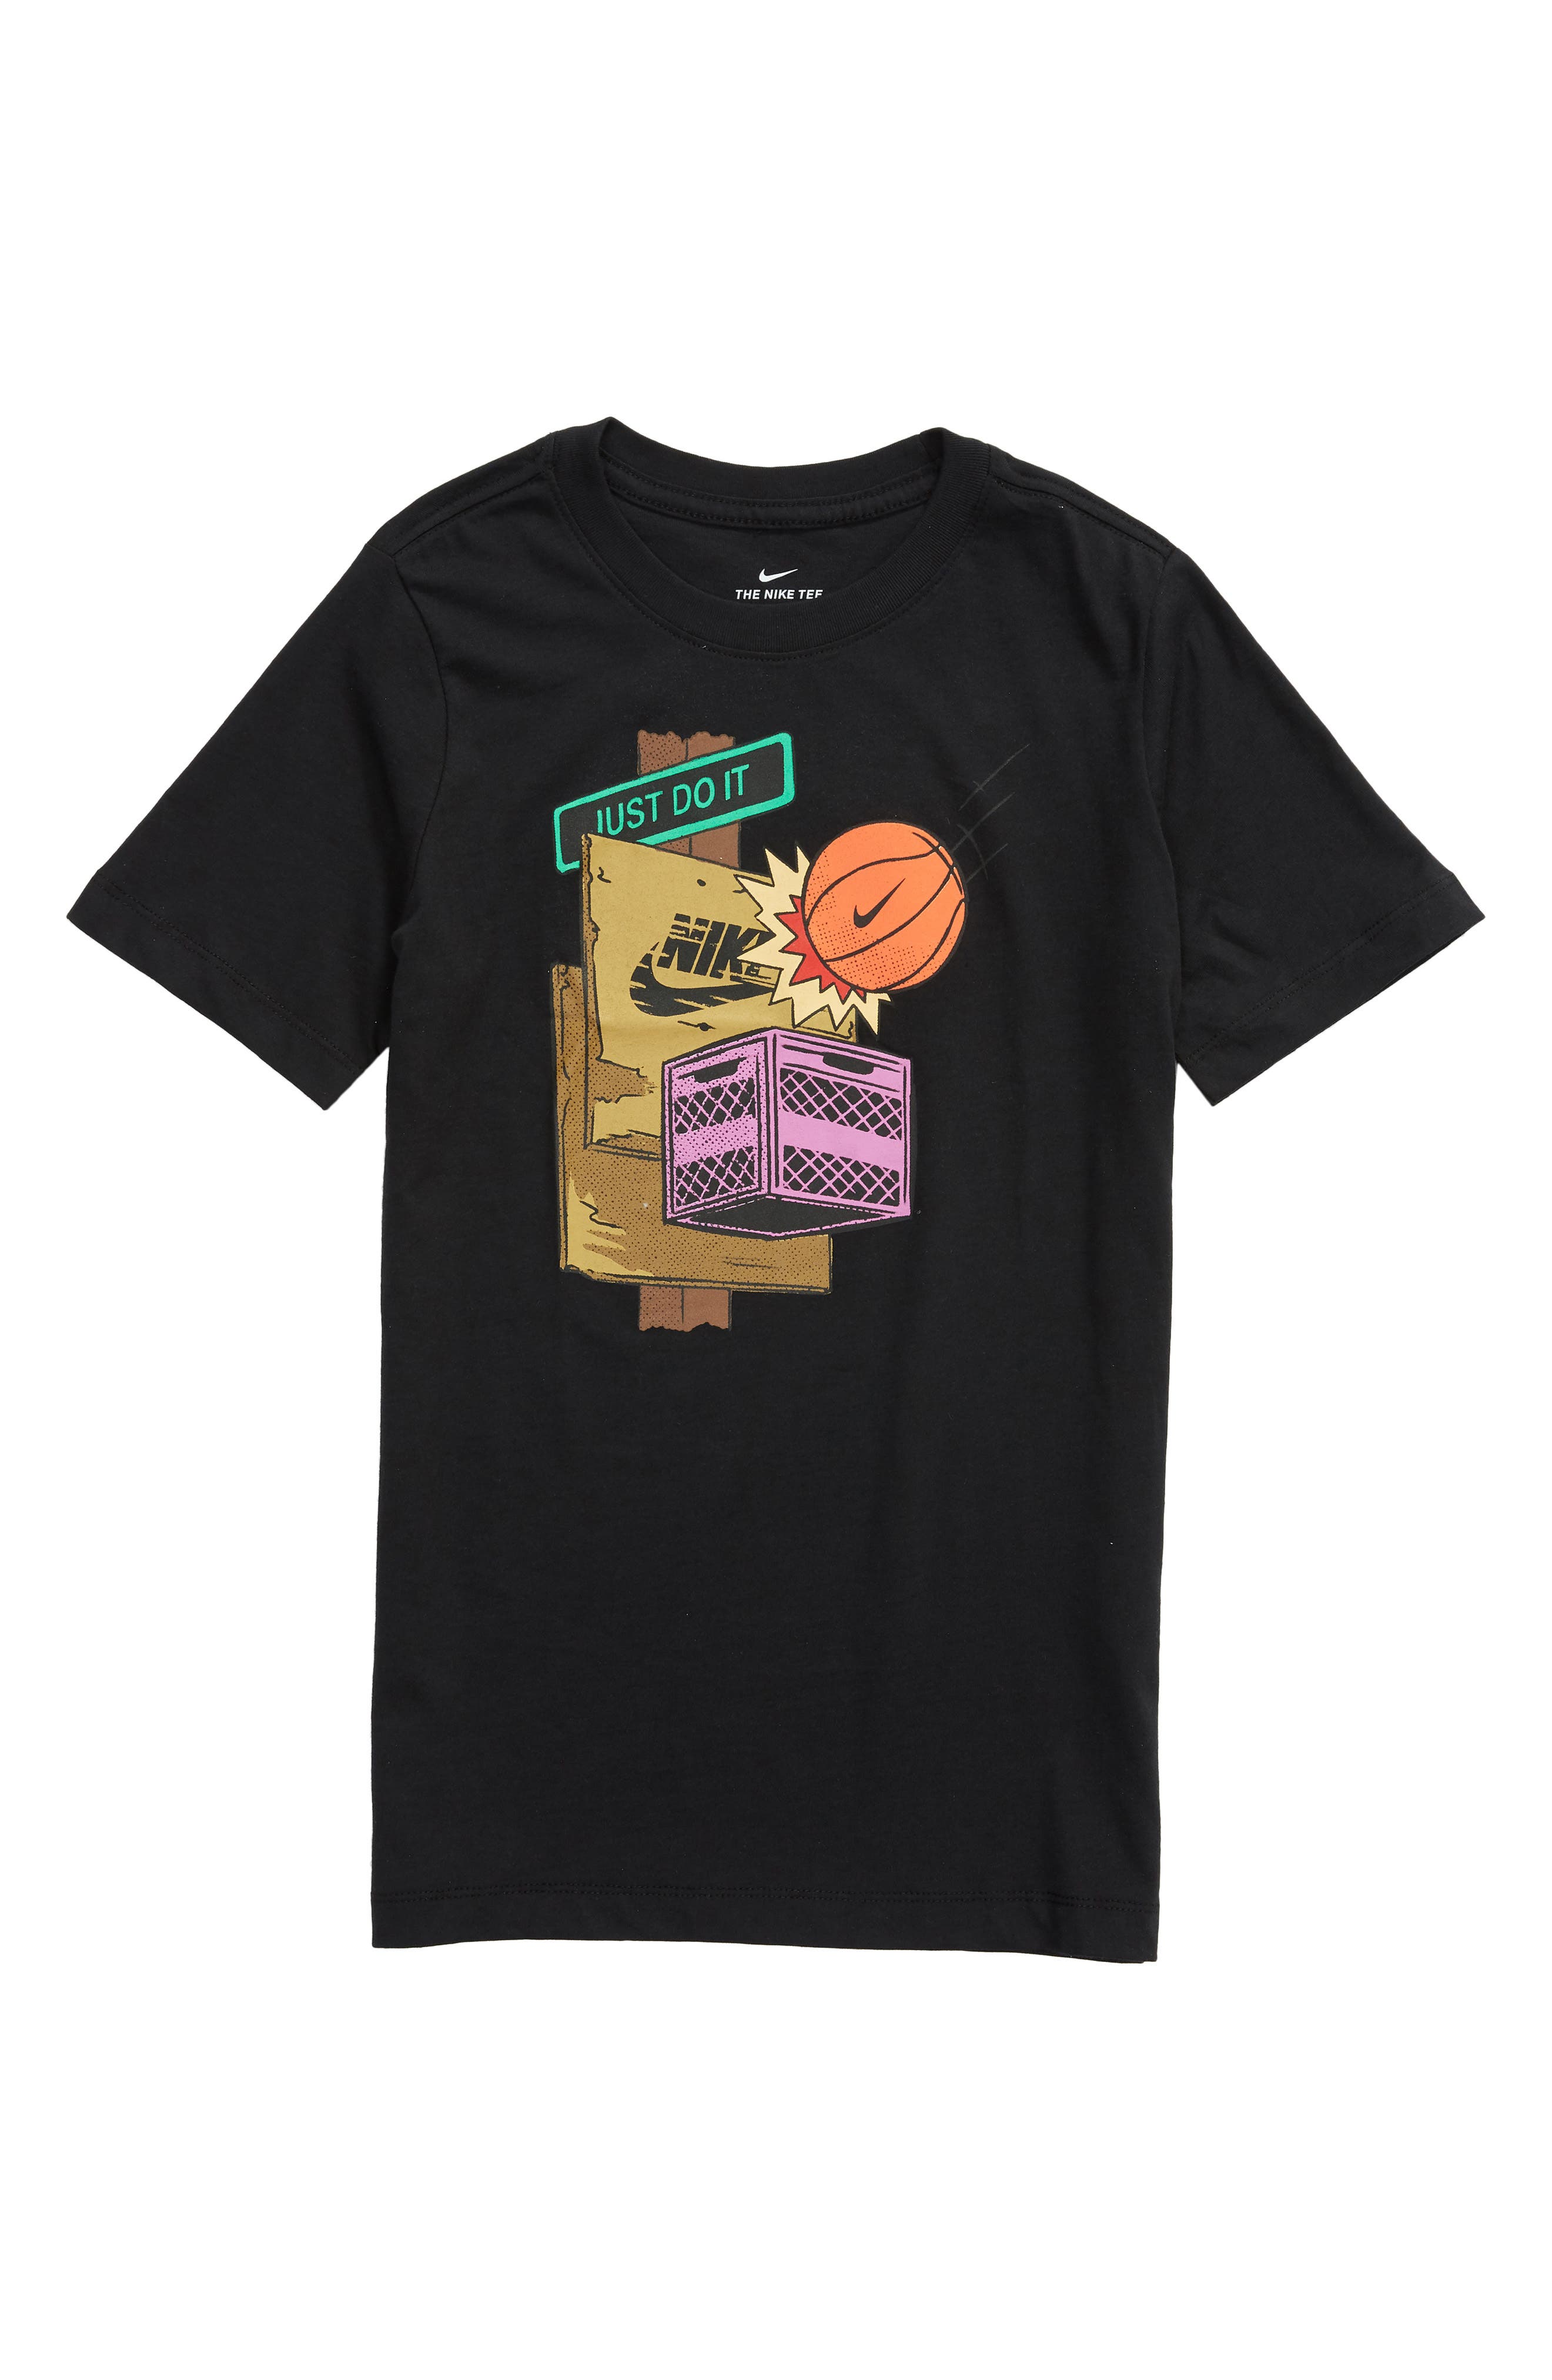 cool nike graphic tees